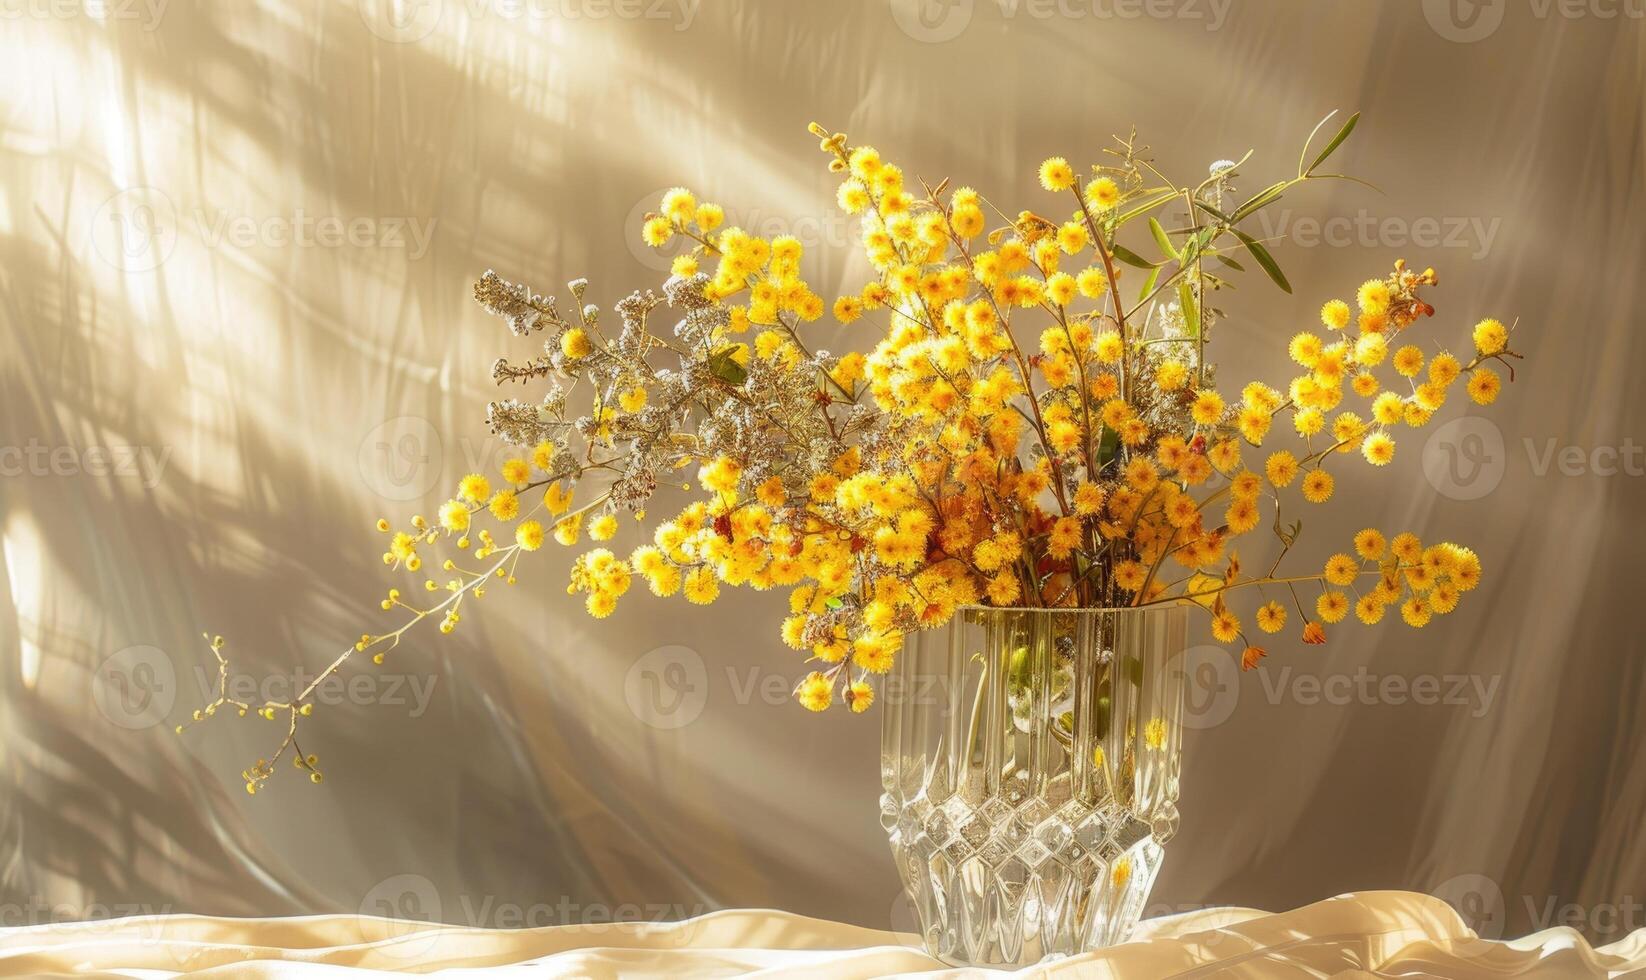 Bouquet of blooming Mimosa branches in glass vase photo